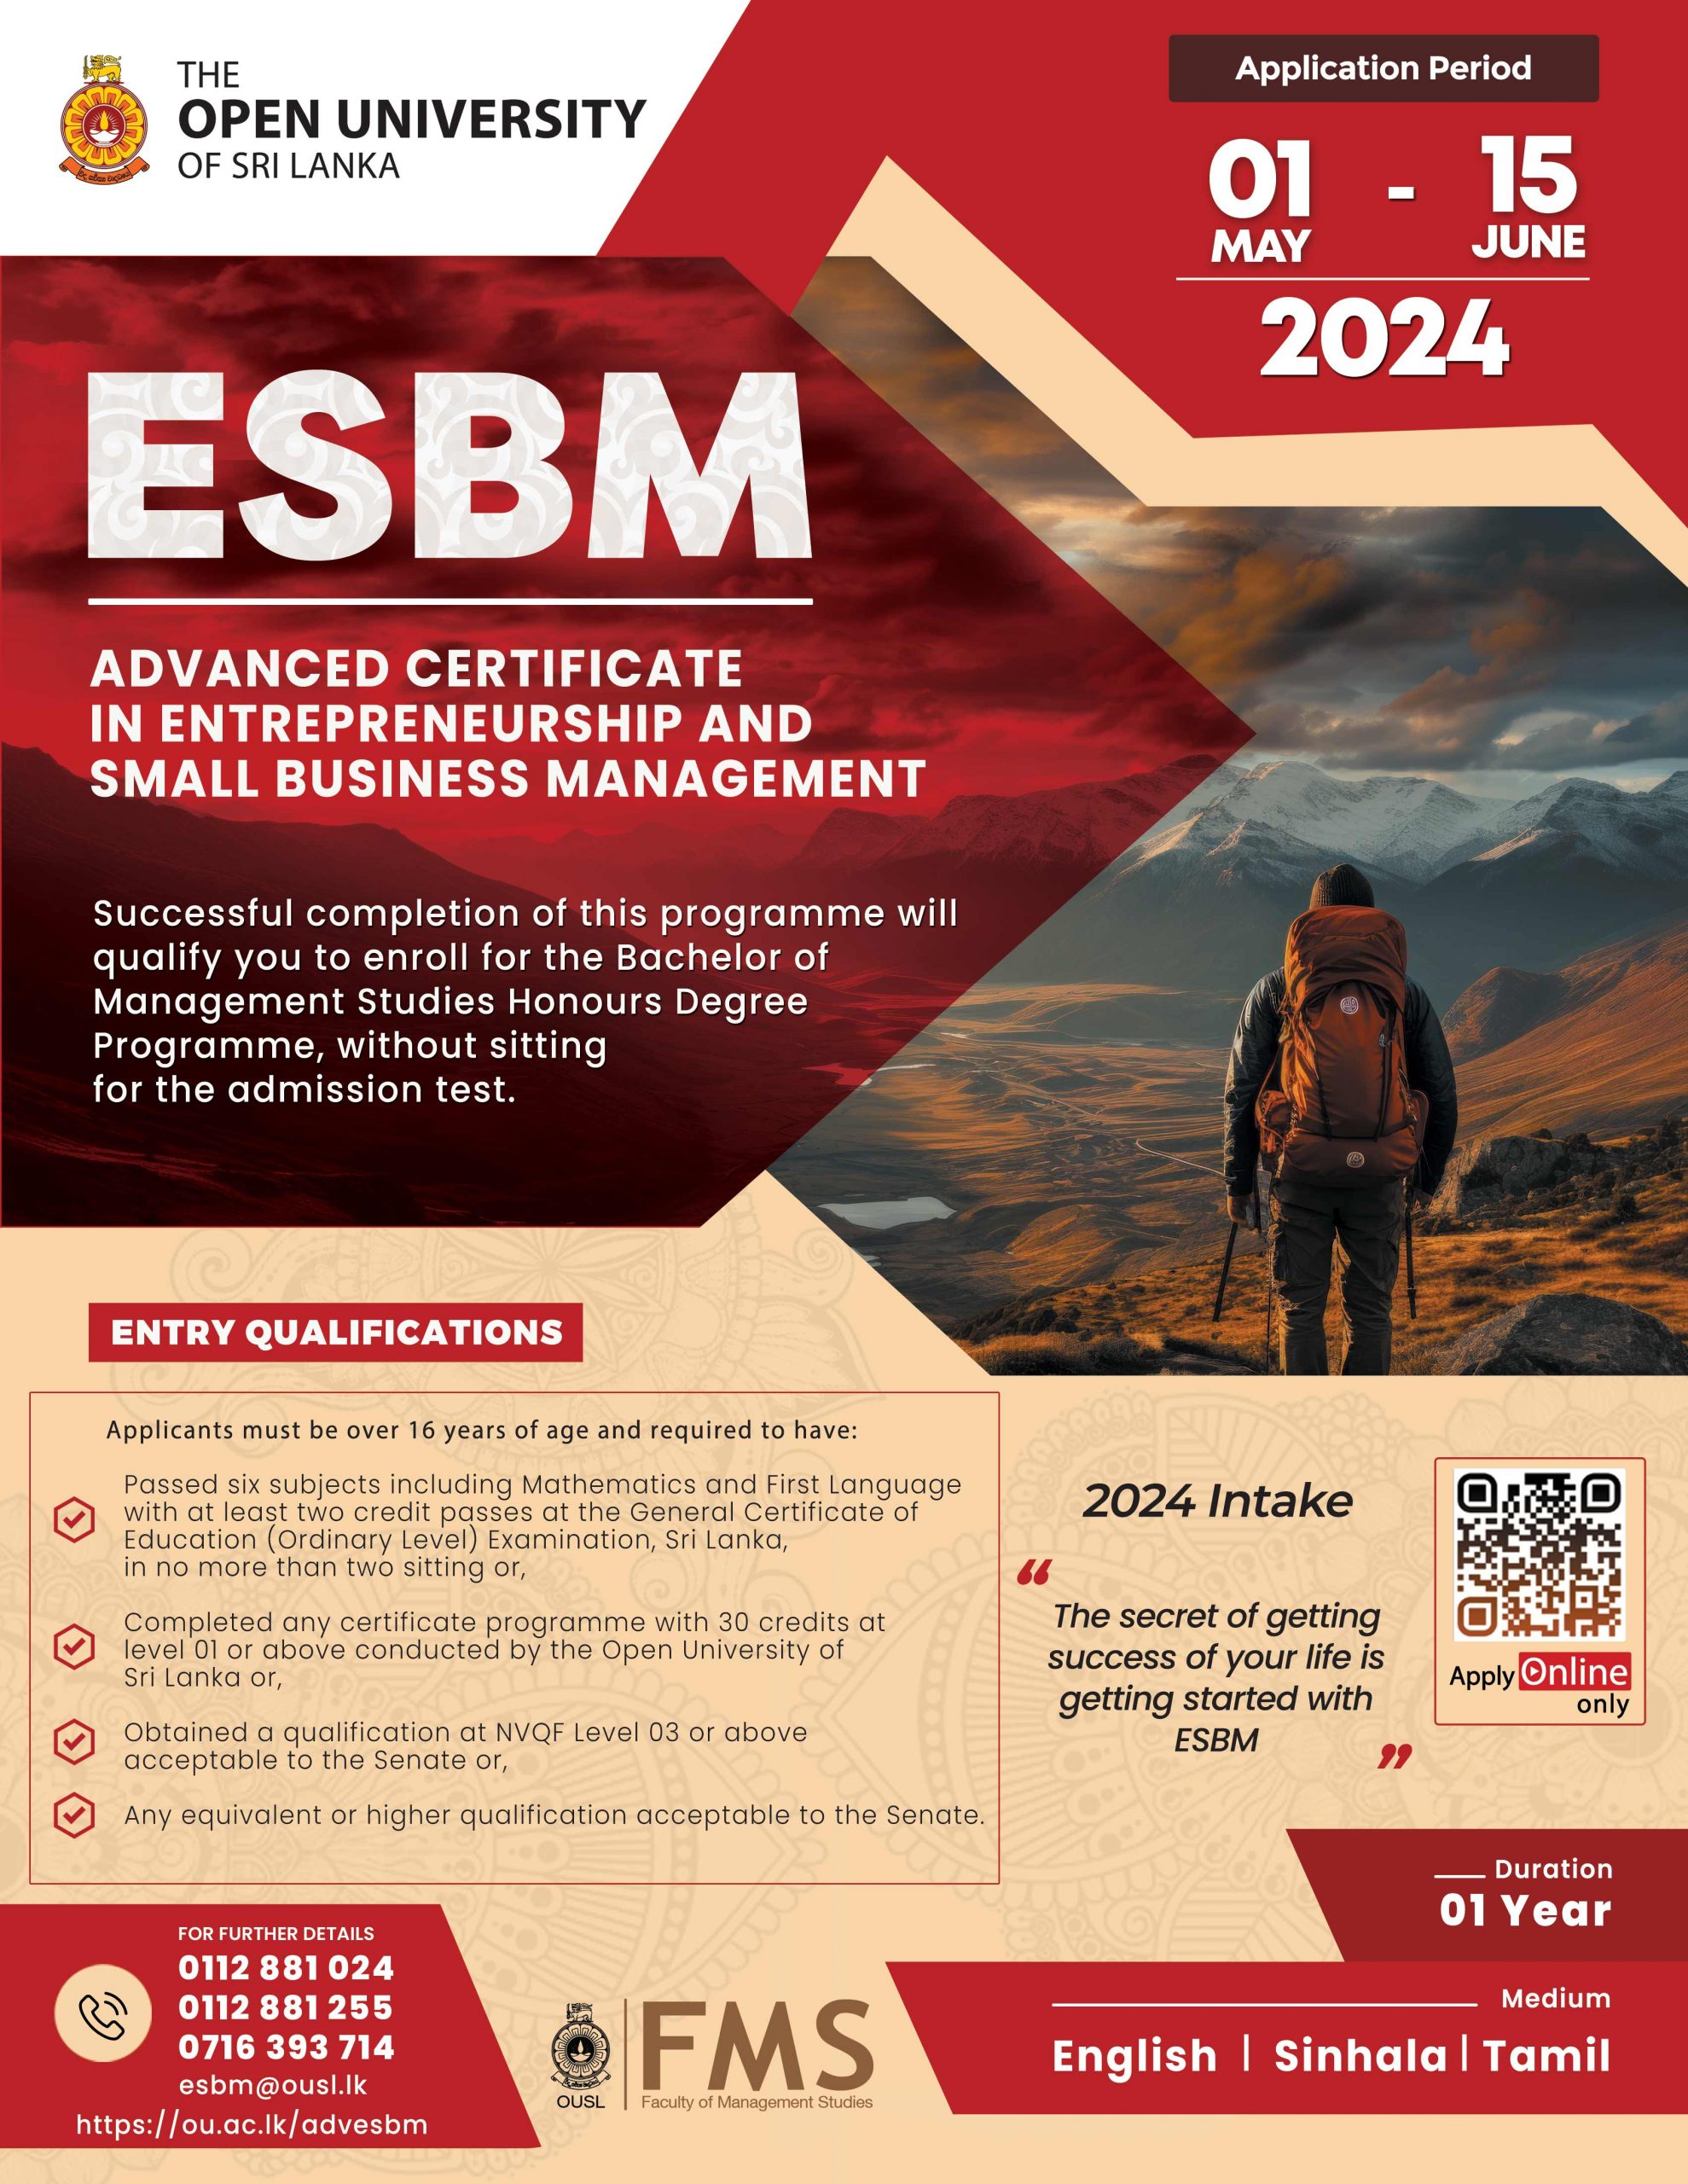 Advanced Certificate Programme in Entrepreneurship and Small Business Management (ESBM)